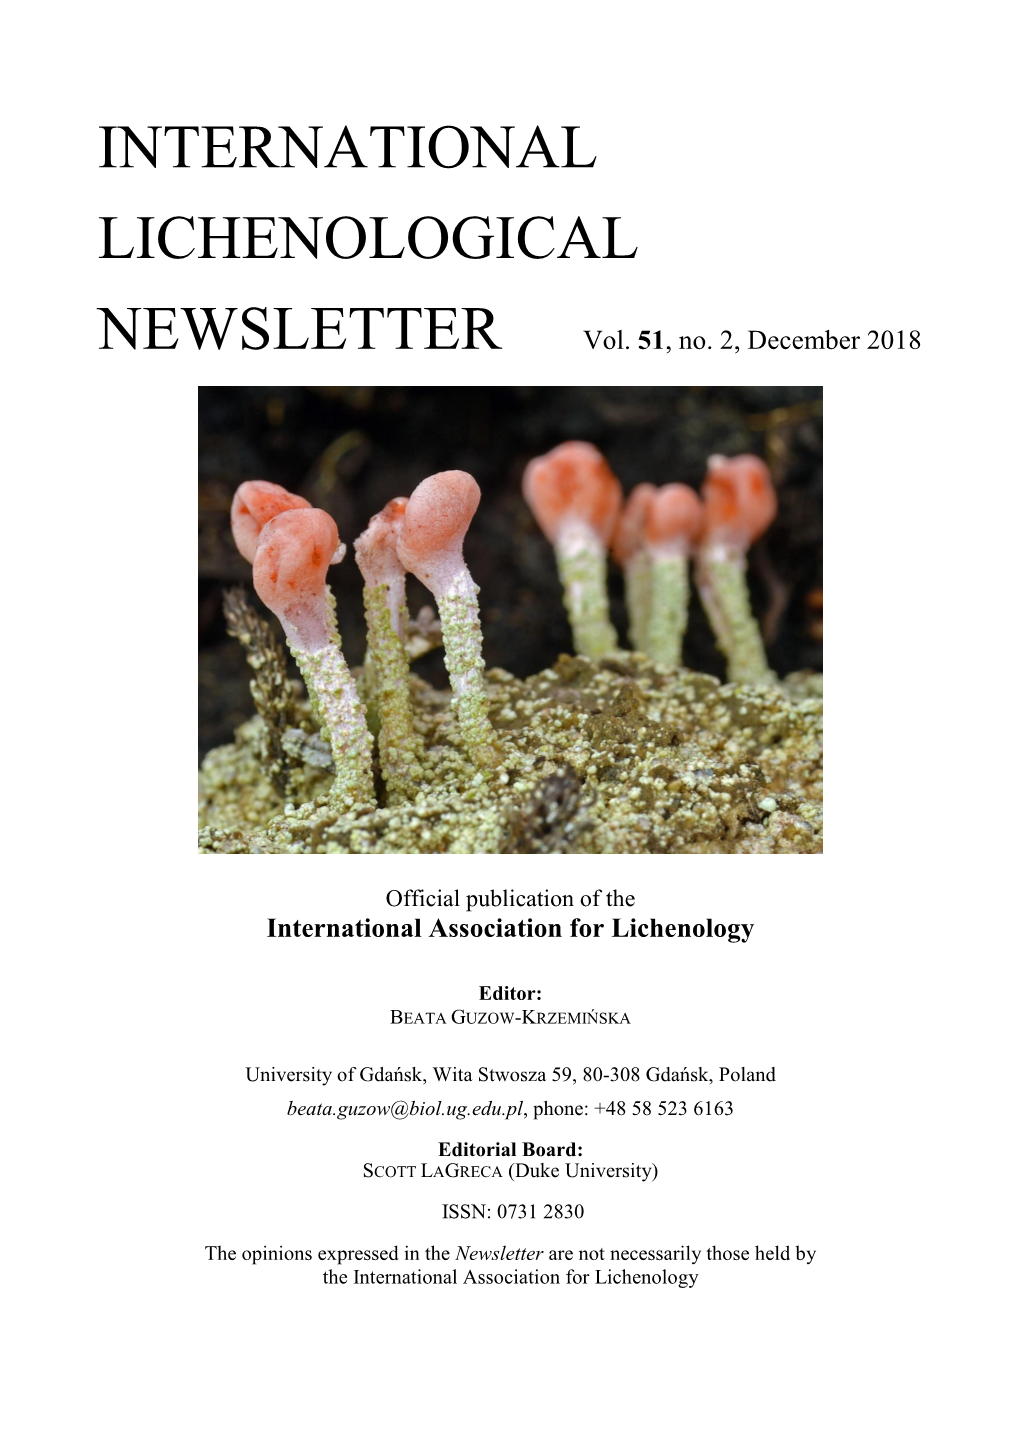 International Lichenological Newsletter Is the Official Publication of IAL